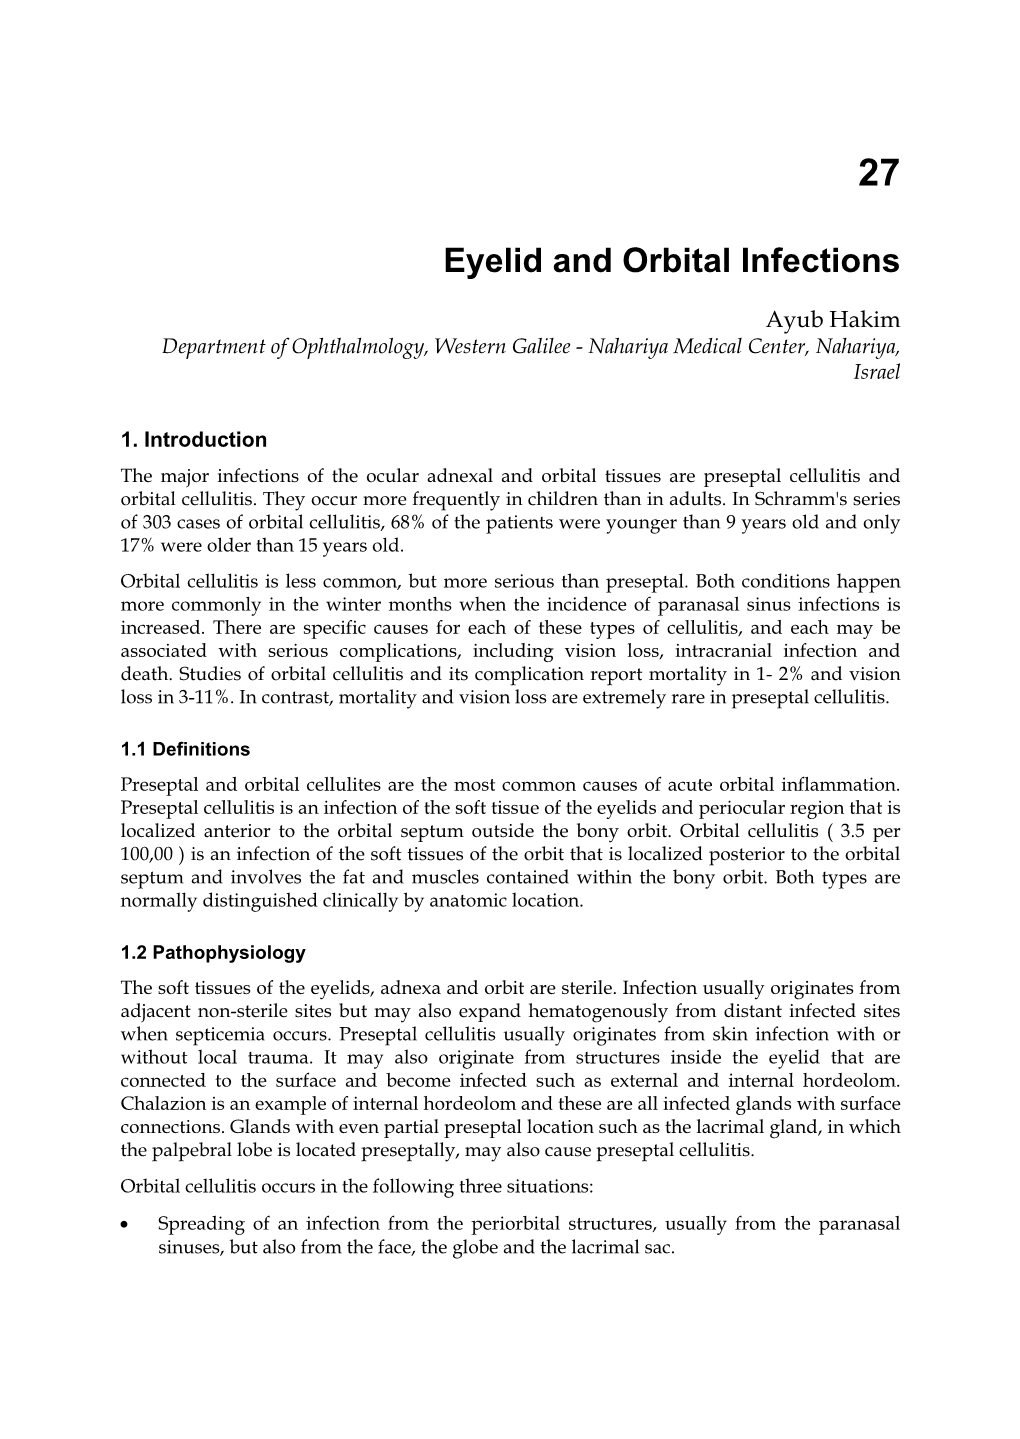 Eyelid and Orbital Infections